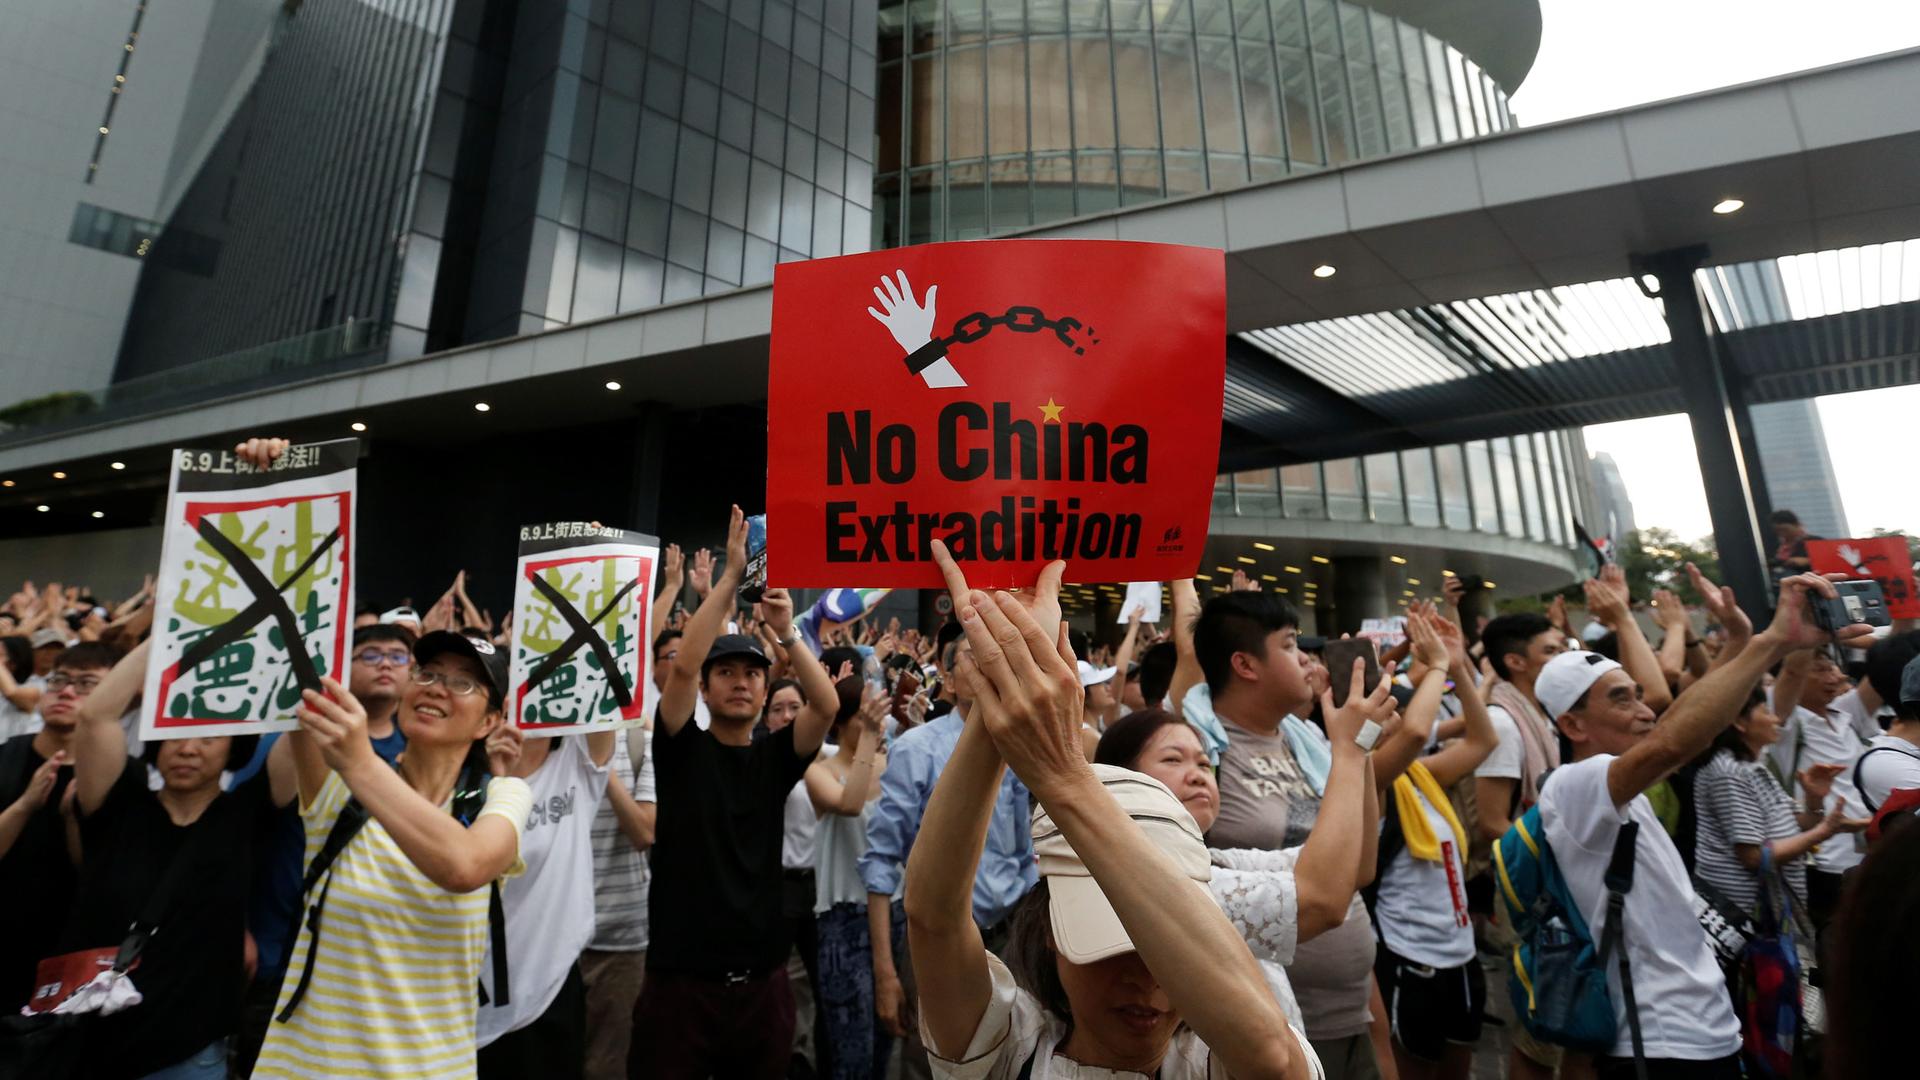 Thousand of people are shown in the streets of Hong Kong with several holding placards.